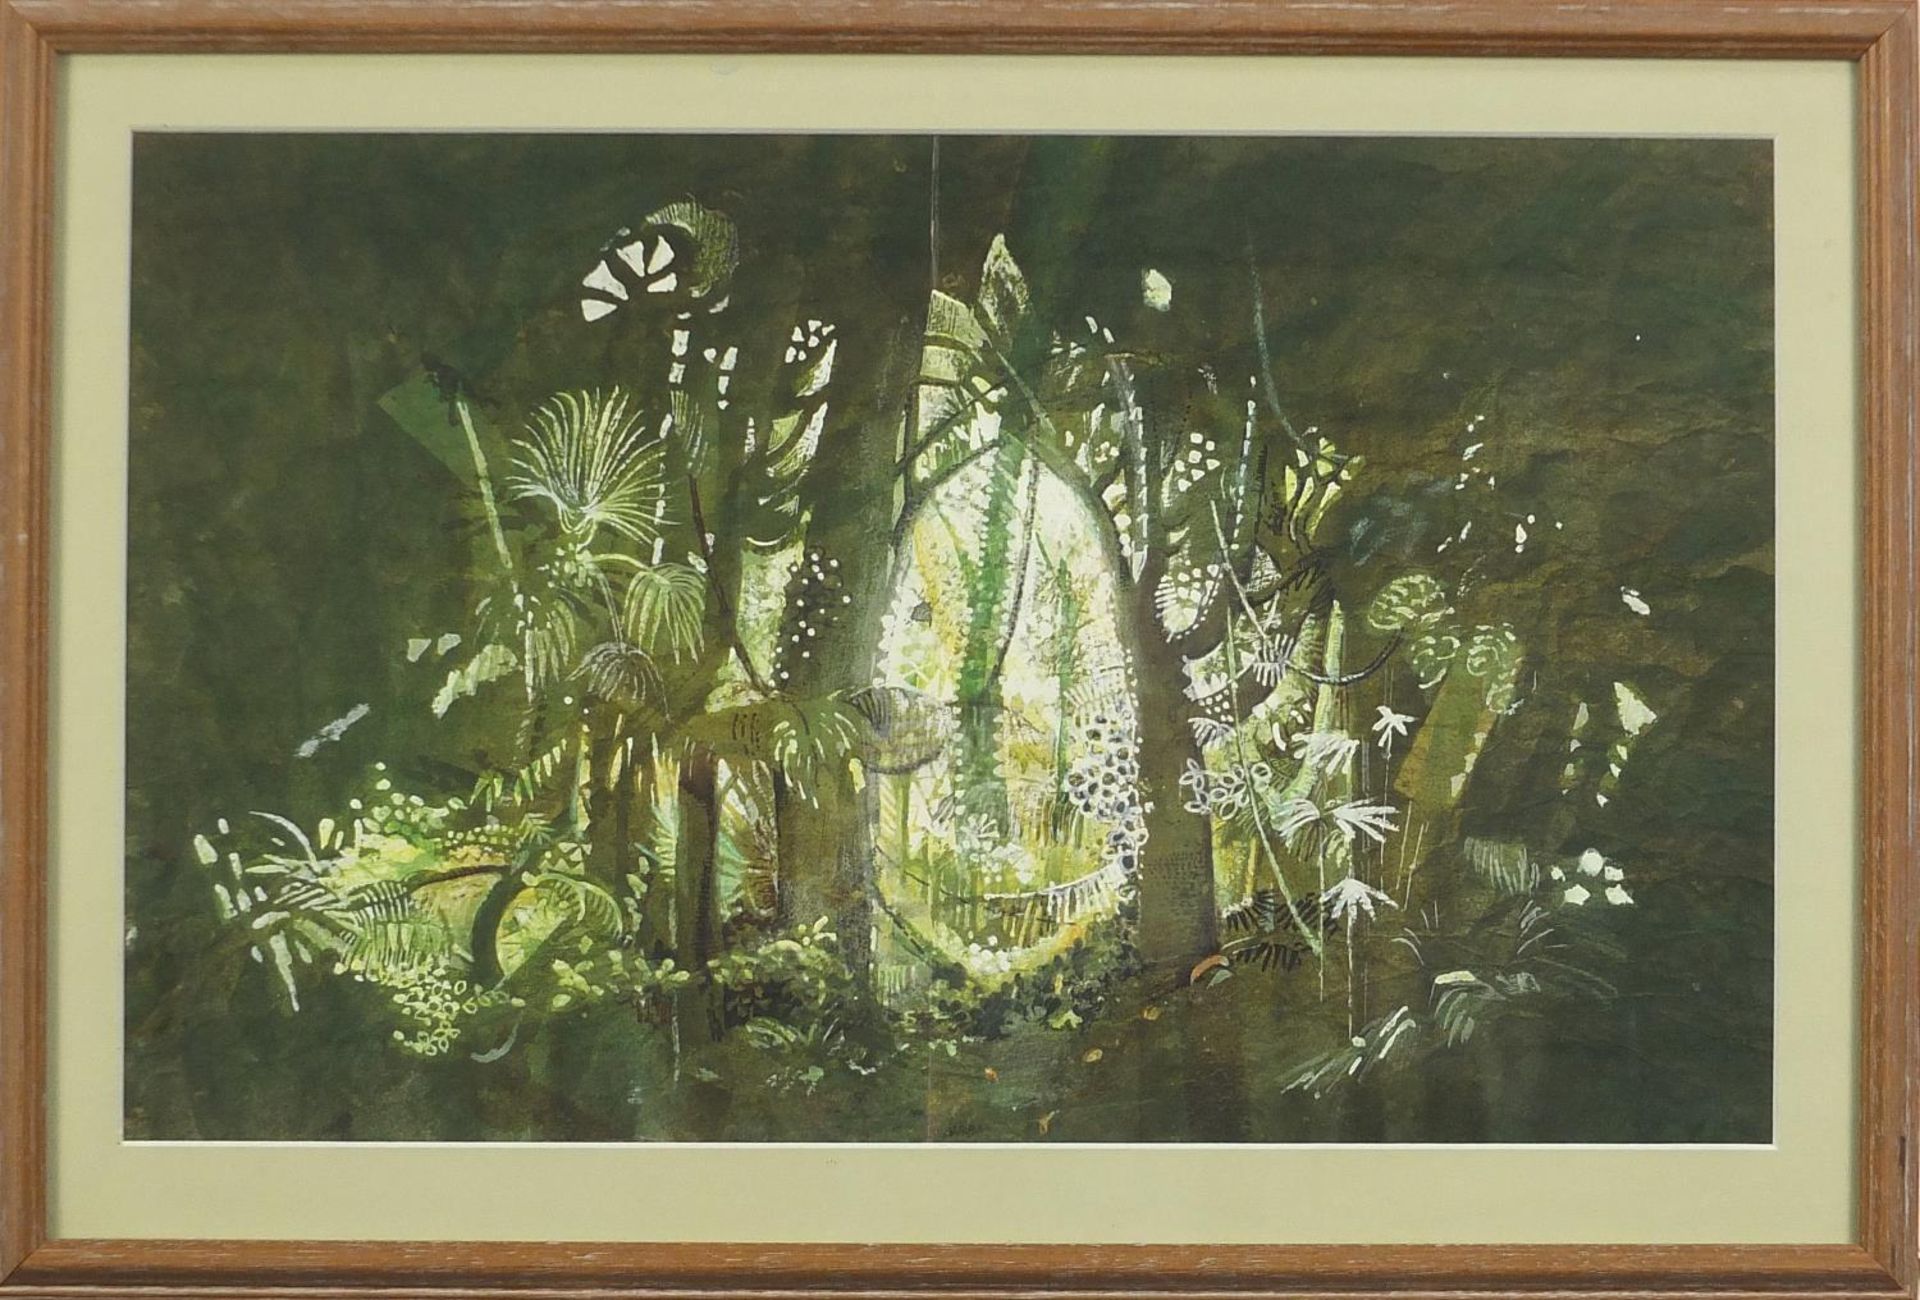 Peter Rice - Back cloth for Jungle scene, watercolour illustration, details verso, mounted, framed - Image 2 of 5